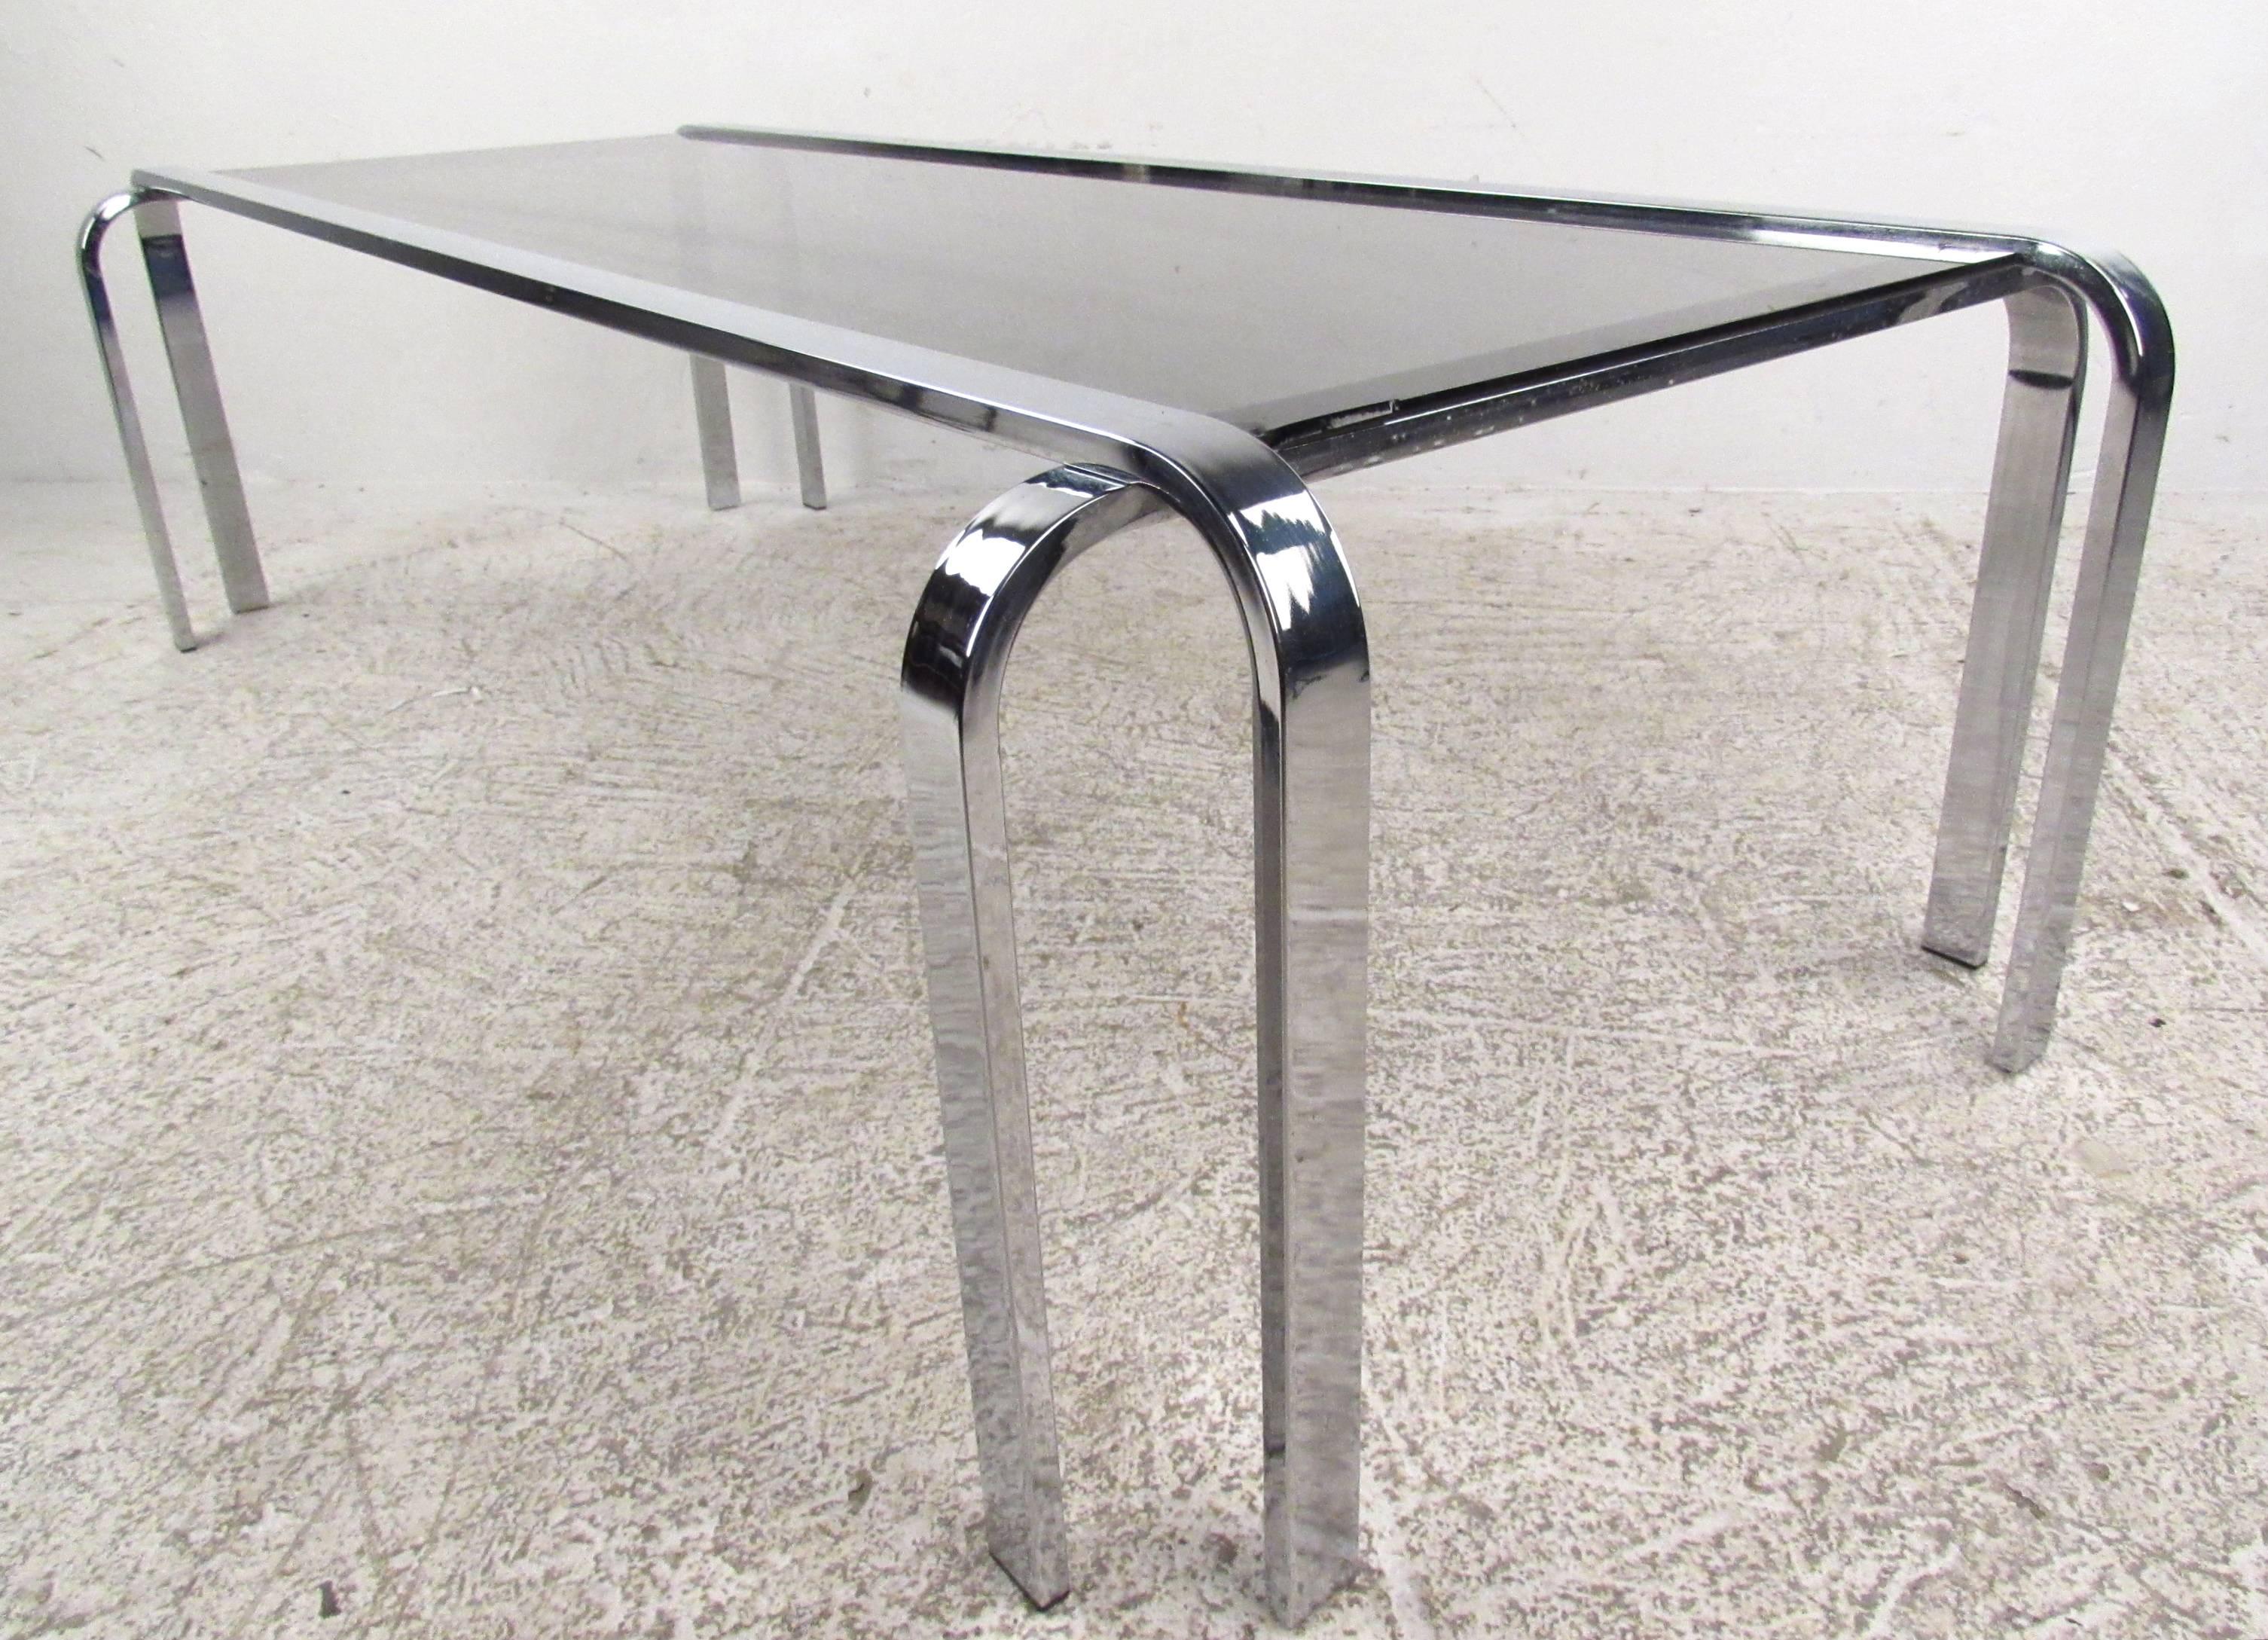  Mid-Century Modern Chrome and Glass Cocktail Table In Good Condition For Sale In Brooklyn, NY